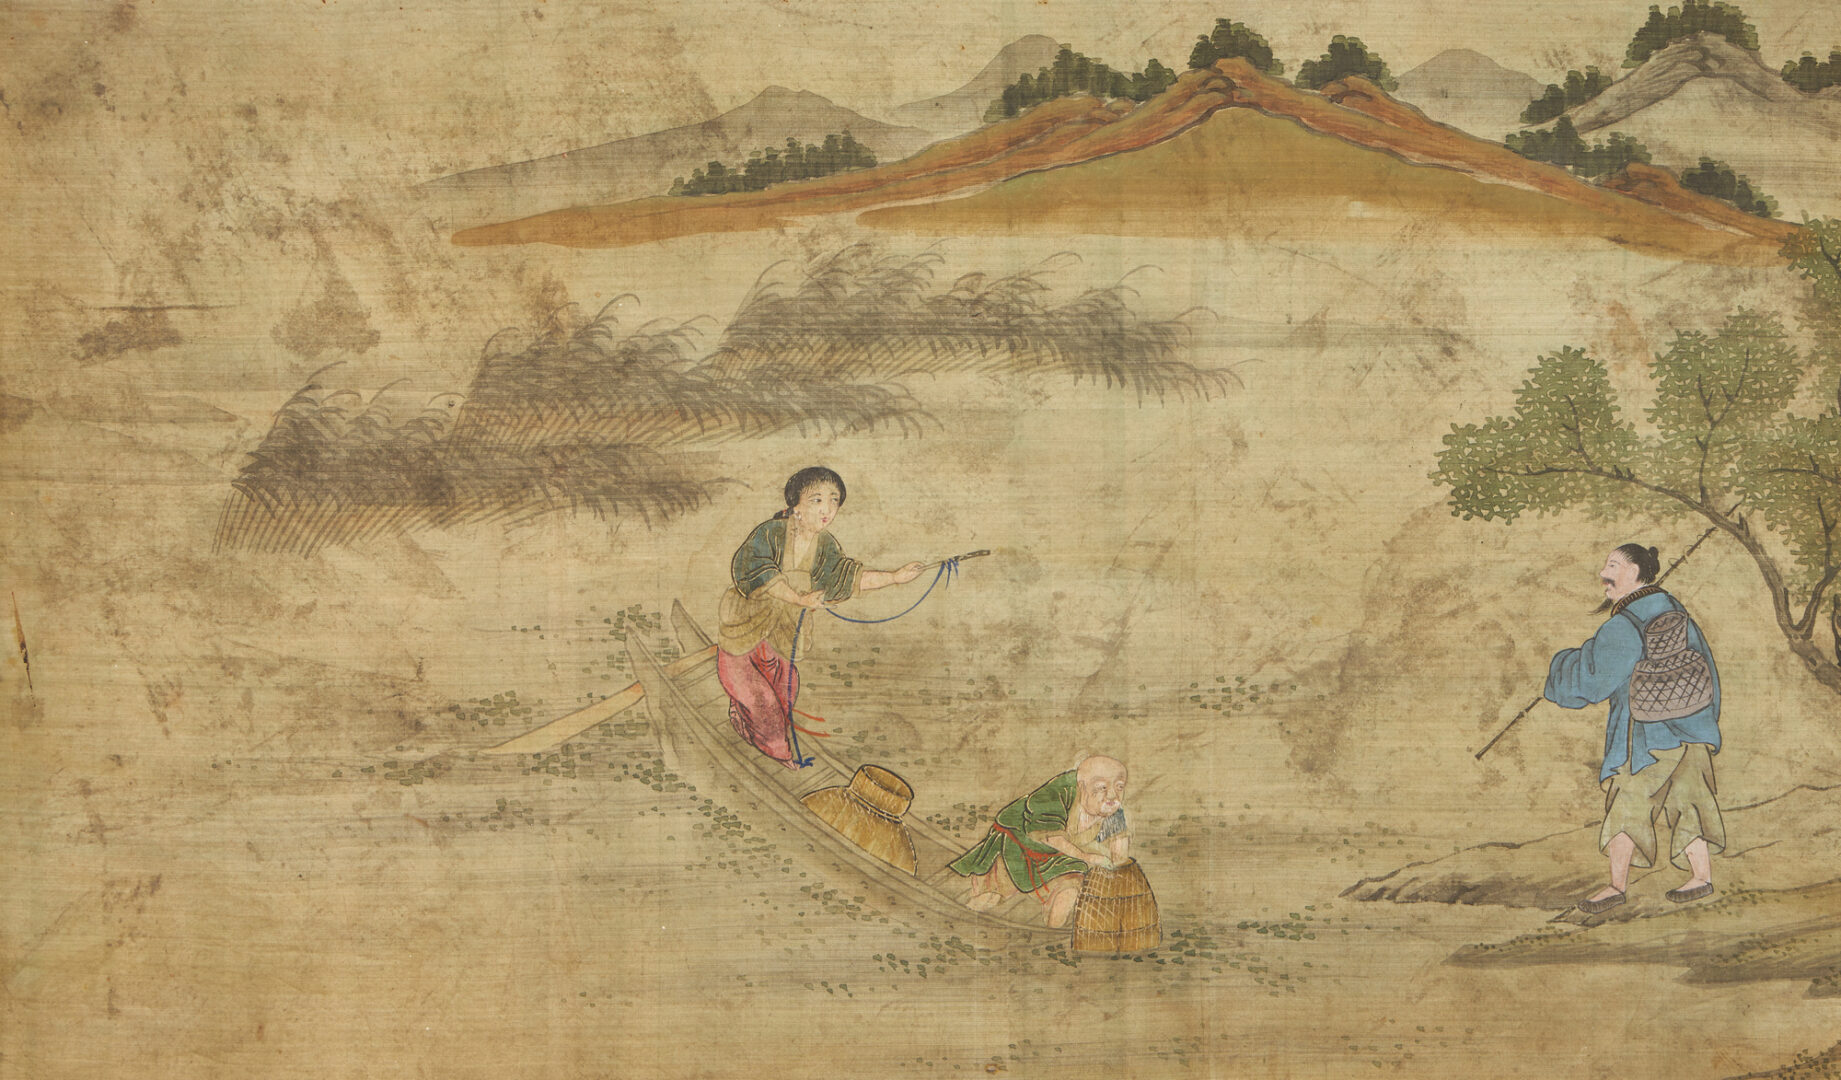 Lot 30: Large Qing Panoramic Chinese Scroll Painting